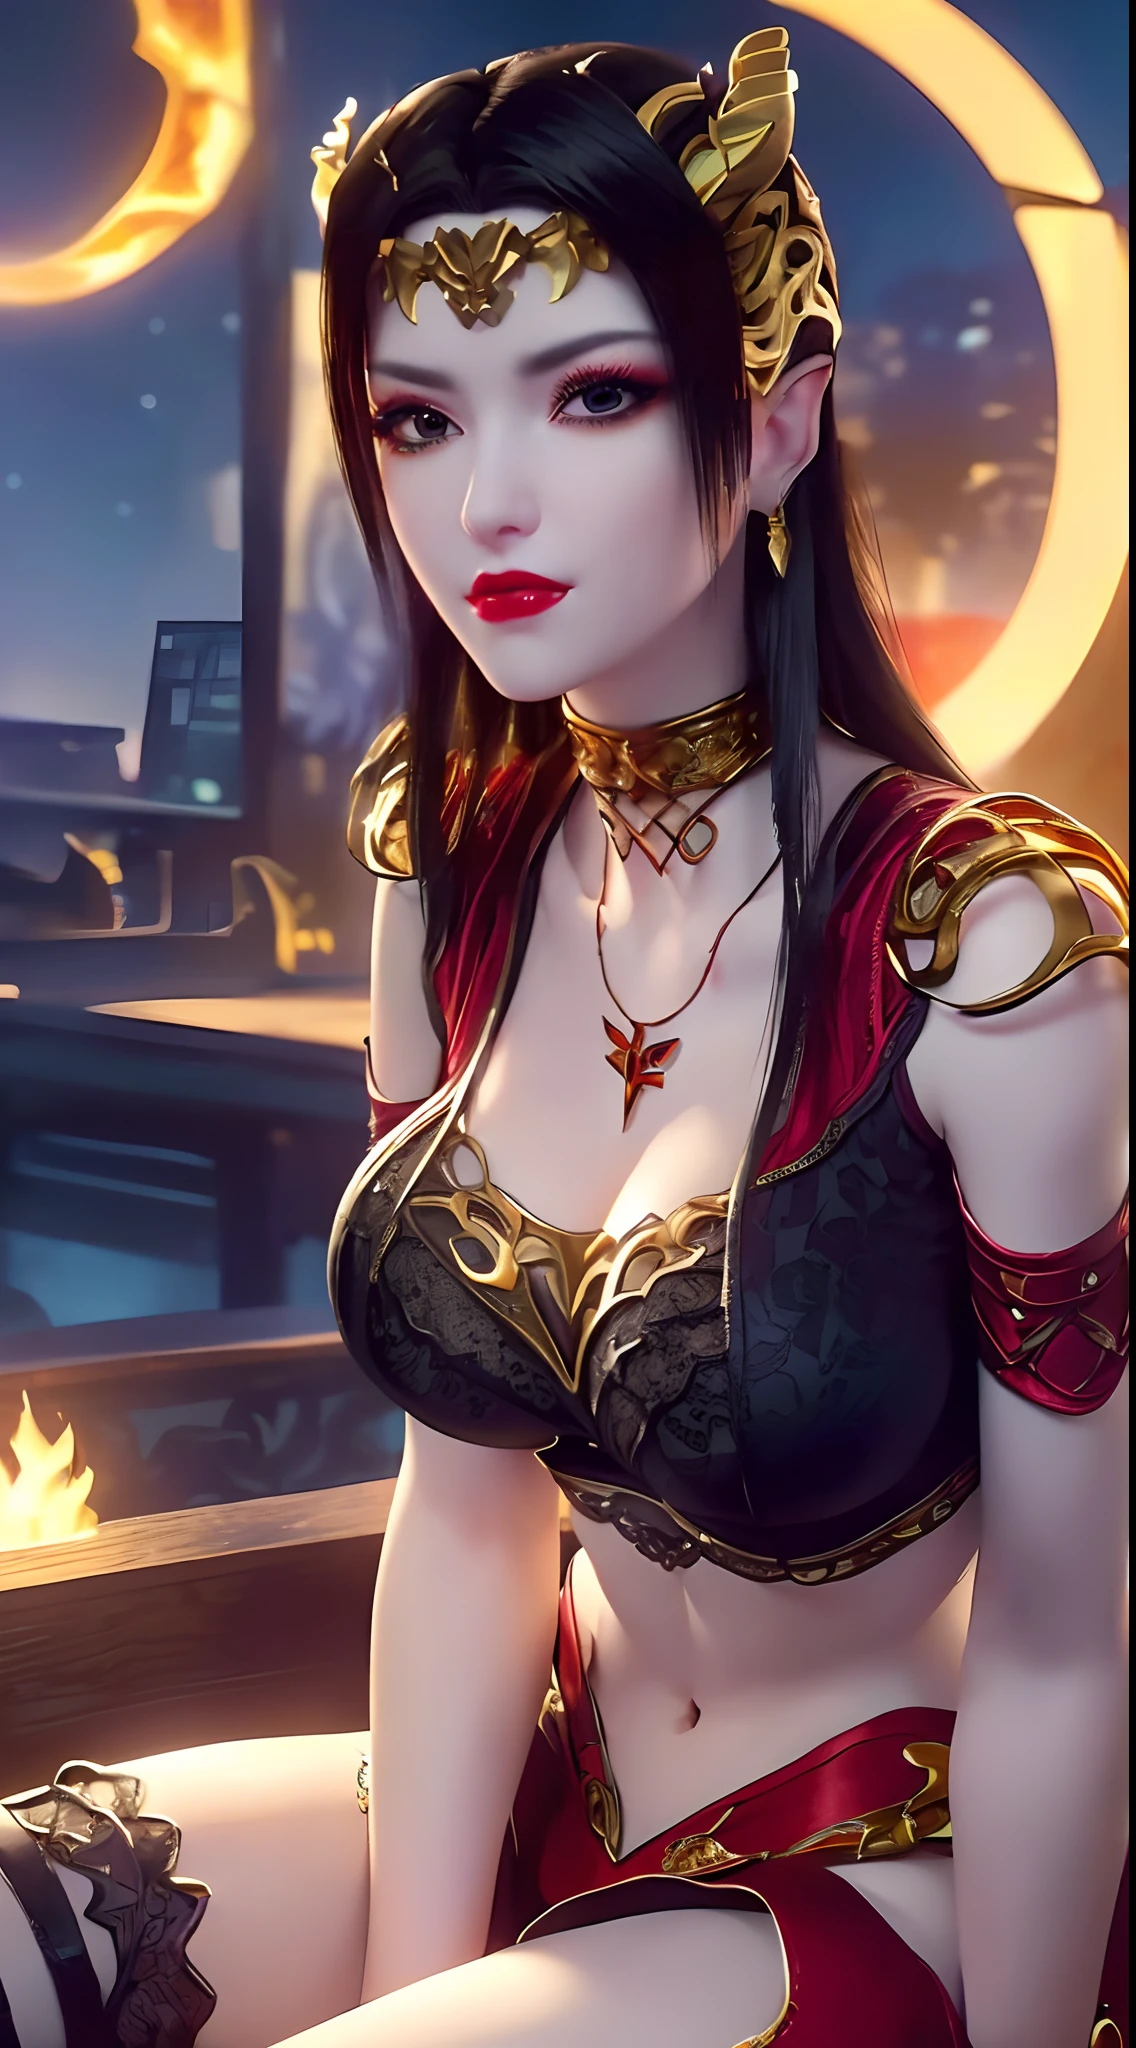 1 beautiful and sexy 20 year old girl, ((wearing a red bra with gold trim:1.8)), ((motifs and rhinestones on the bra:1.7)), ((long black hair:1.6)), jewelry elaborately made from precious stones and beautiful hair, ((wearing a 24k gold lace necklace:1.4))), ((A thin red silk scarf covers half of the face:1.5)), the noble, noble style of an extremely beautiful girl, her small face is super cute, her face is very pretty, thin eyebrows, flawless beautiful face, ((black eye pupils: 0.8)), very beautiful eyes, ((platinum blue eyes: 1.6)), (((big round eyes:1.6))), nice makeup and hair detailed eyelashes, steamy eye makeup, high nose, earrings, red lips, ((closed mouth: 1.5)) beautiful lips, slim hands, most beautiful thighs, ((arms spread out to the sides: 1.5)), rosy face, clean face, flawless beautiful face, smooth white skin, (big breasts: 1.5)), ((high breasts: 1.6)), tight breasts, beautiful cleavage, (((big breasts and super round: 1.8))), ((super tight breasts: 1.7)) , beautiful breasts, perfect body, ((sitting position bent over with chest up and arms behind: 1.6)), ((thin red mesh stockings with black lace trim:1.6)), 8k photo, super high quality, super realistic, super 10x pixels, optical, bright studio, bright edges, dual-tone lighting, (high-detail skin:1.2), super 8k, soft lighting, high quality, volumetric lighting, photorealistic, photorealistic high resolution, lighting, best photo, 4k, 8k quality, blur effect, smooth sharp, 10 x pixel, ((night sky and firefliesbackground:1.5)), aurora, lightning, super graphics realistic, most realistic graphics, 1 girl, alone, solo, Extremely sharp image, surreal, (((frontal portrait:1.6)))."